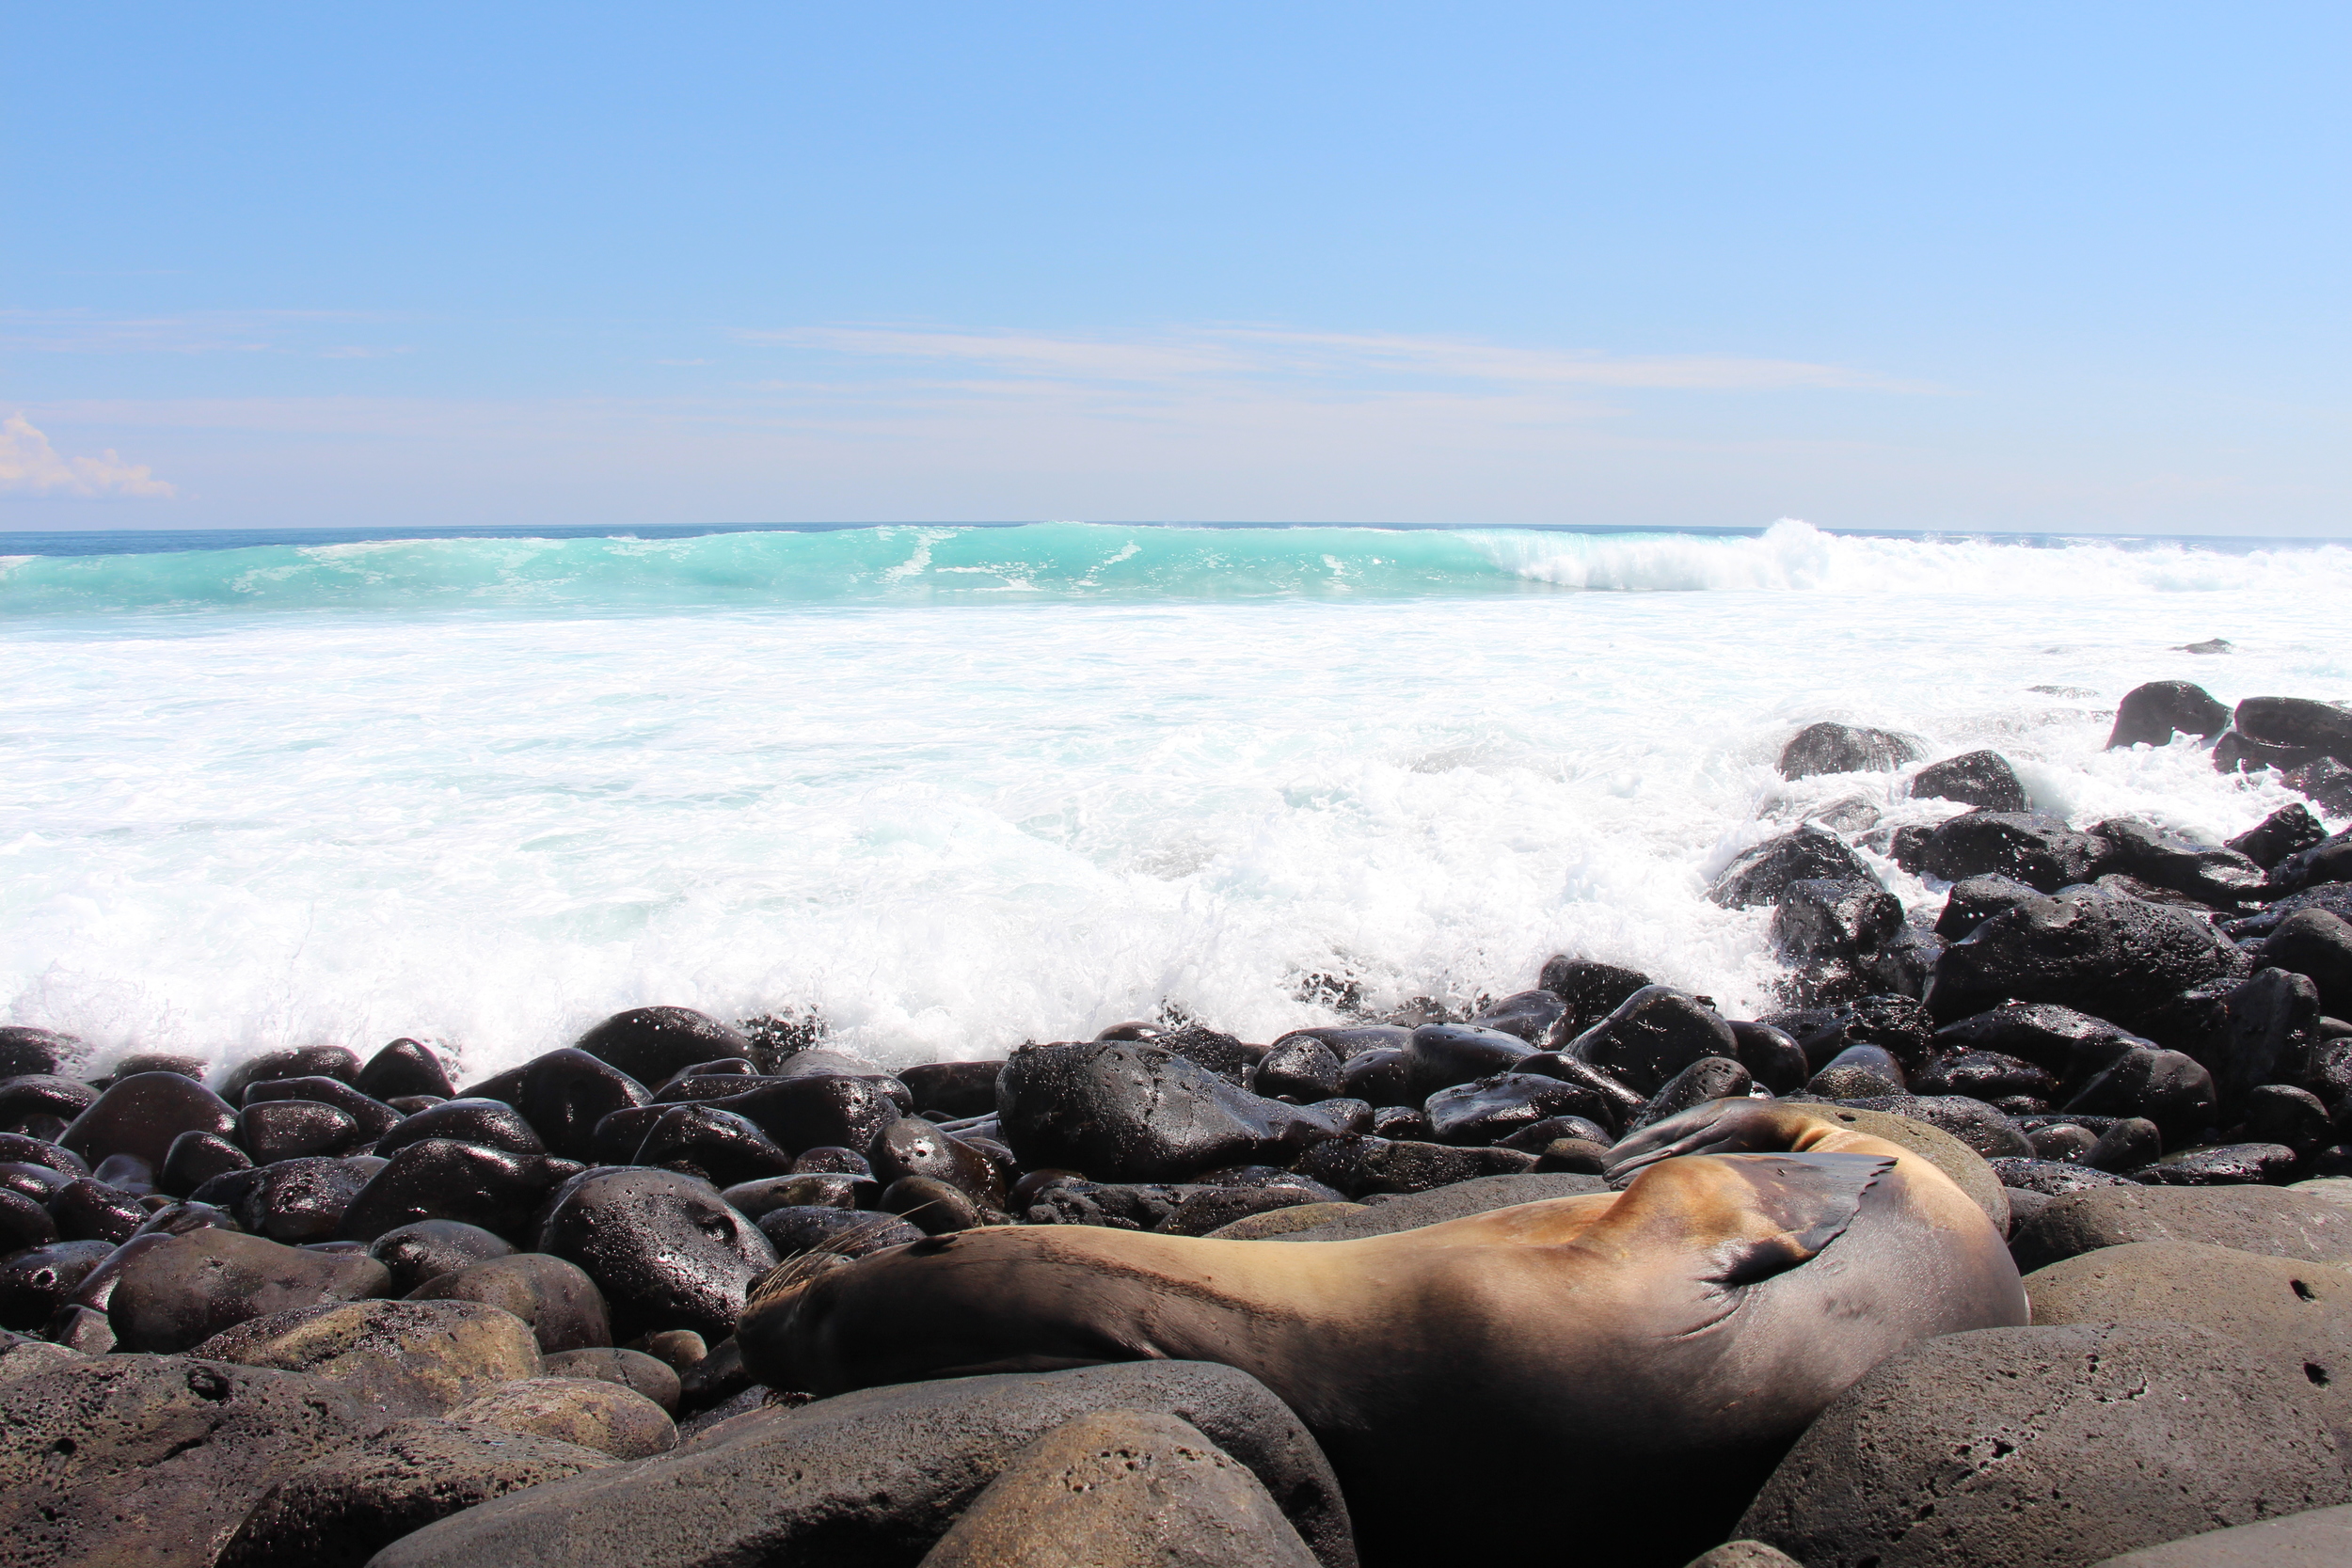 Sea Lion waiting for a refreshing wave